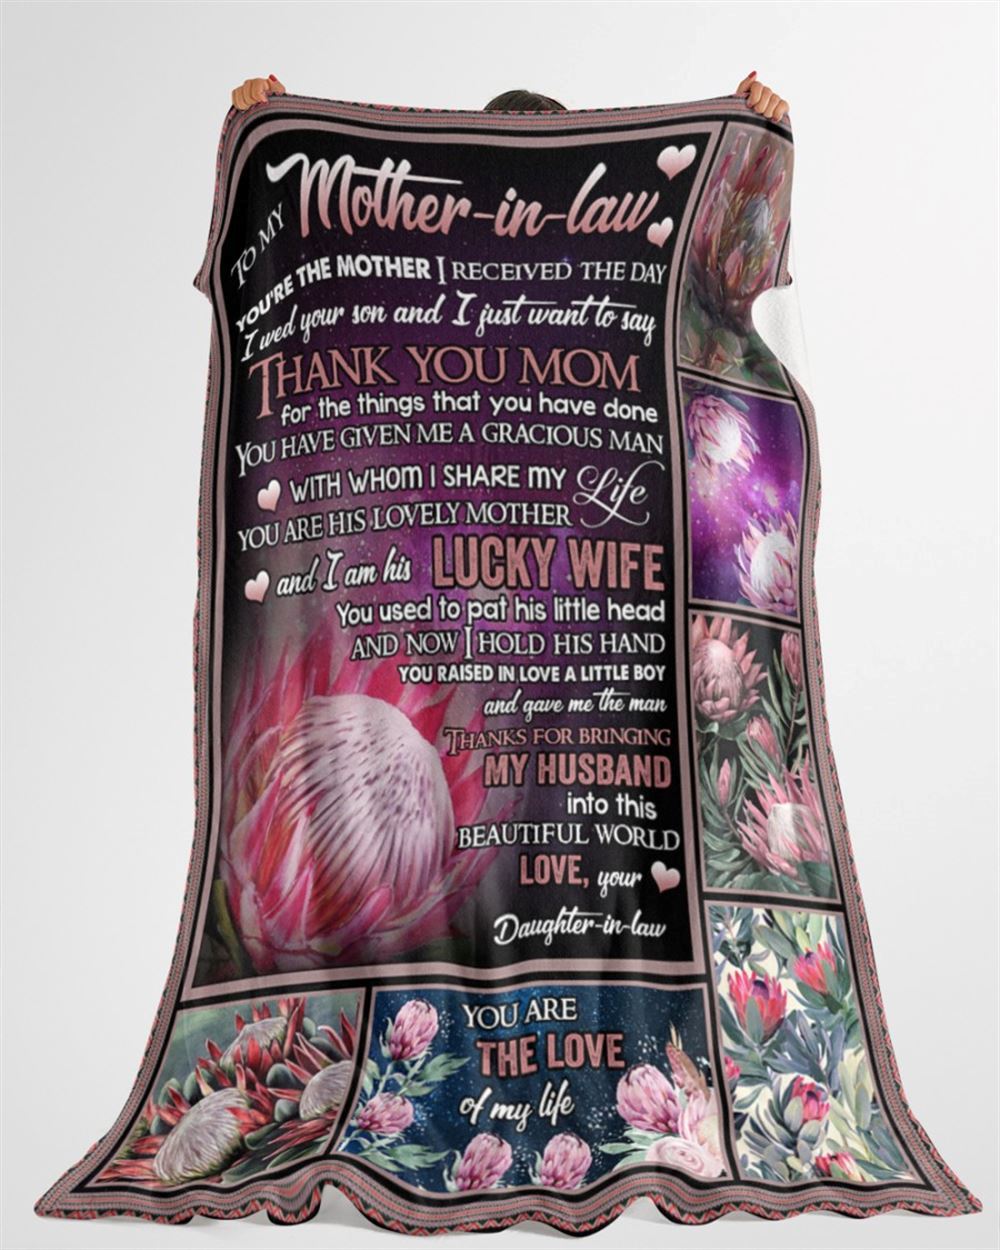 Personalized To My Mother-In-Law Blanket Flower You Have Given Me A Gracious Man Blanket, Mother's Day Blanket, Mom Blanket